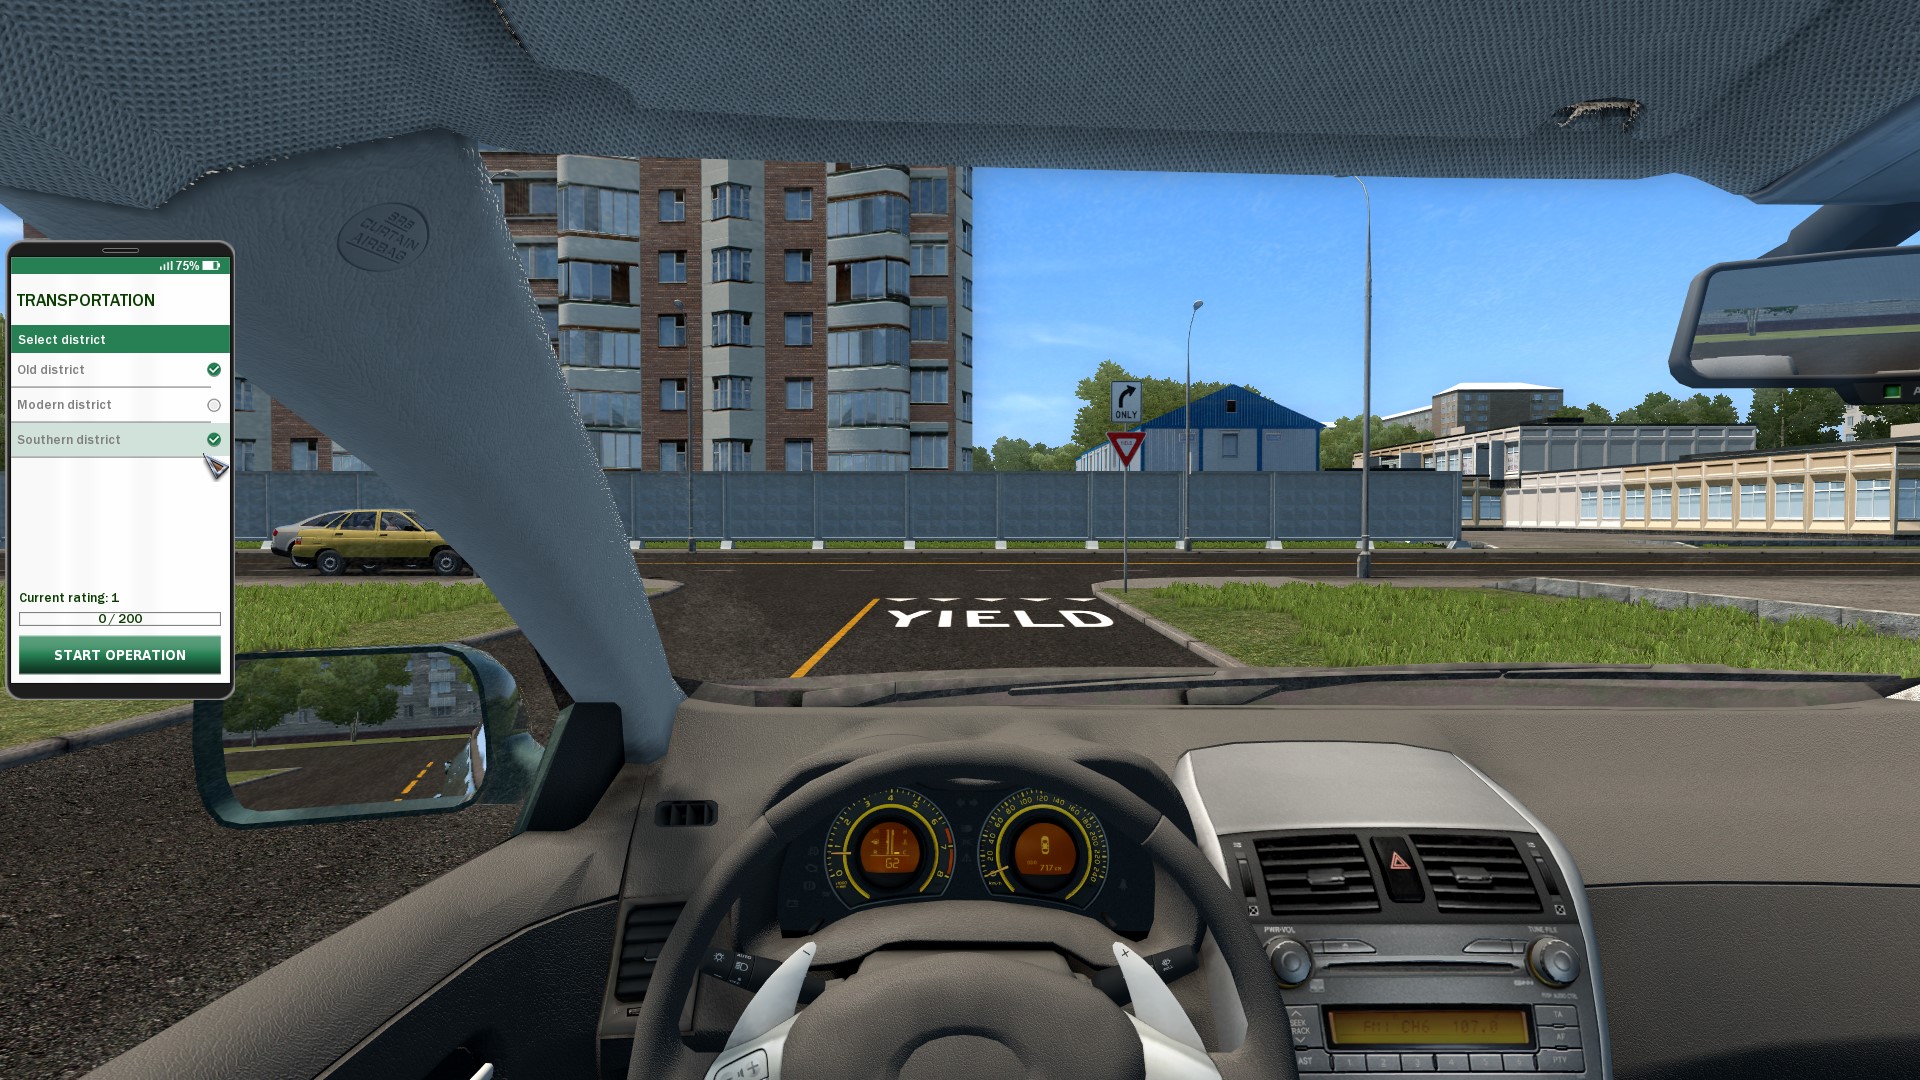 City Car Driving PC Game Latest Version Free Download